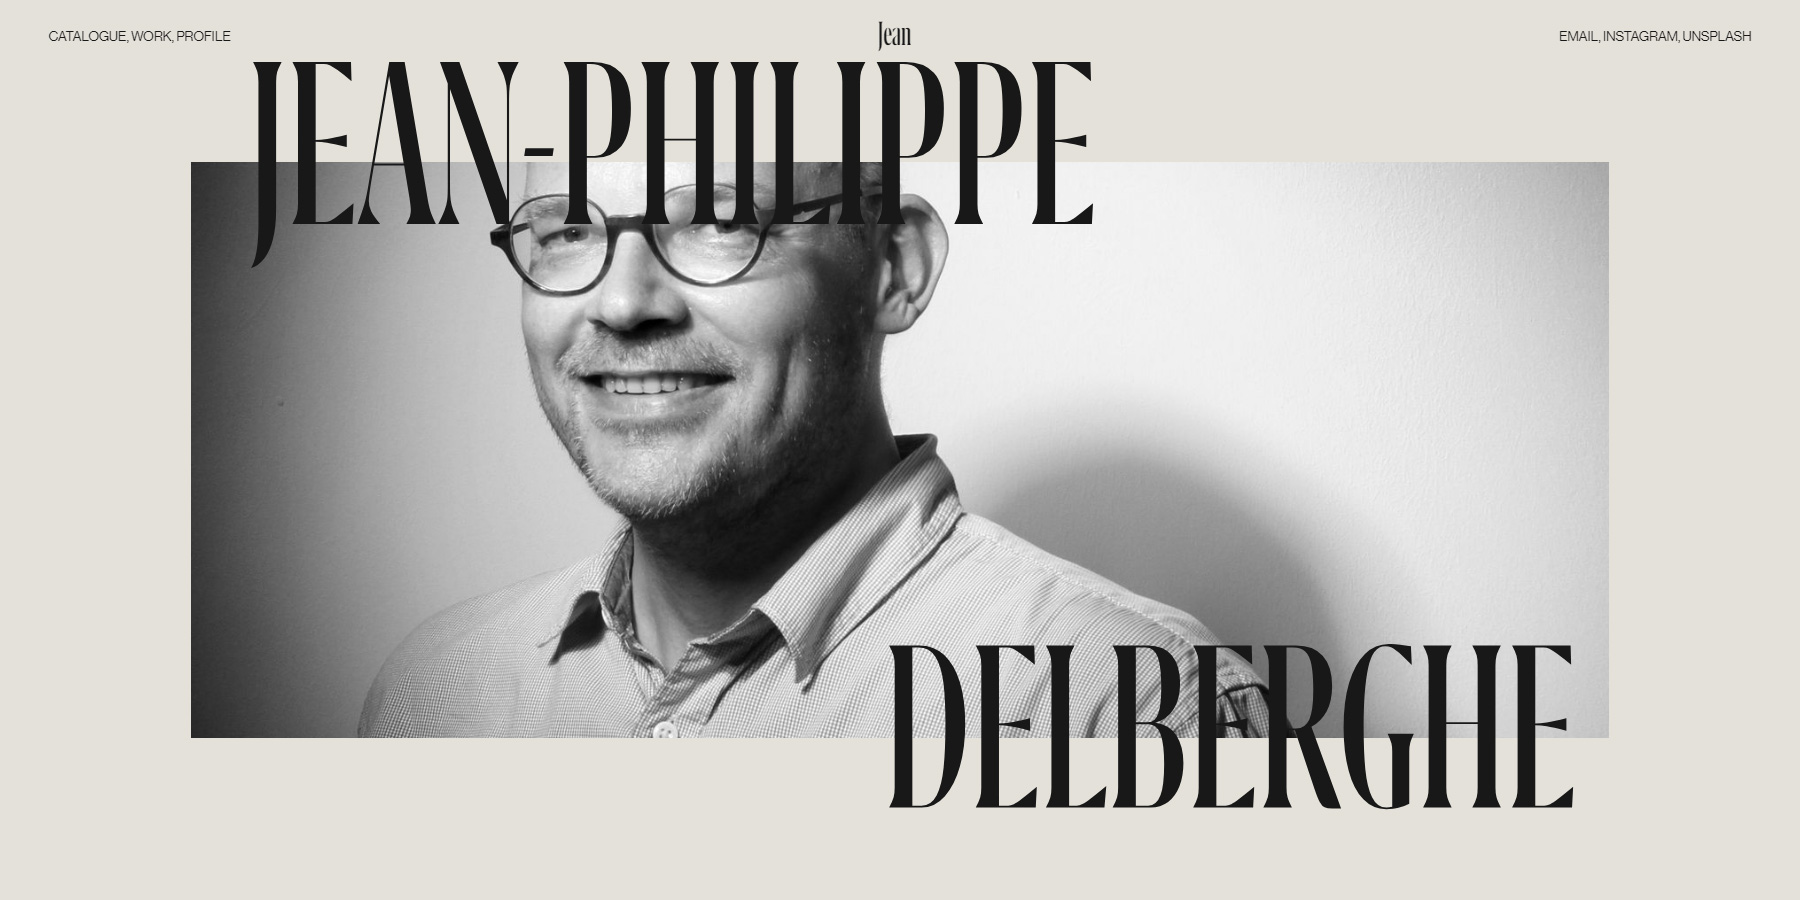 Jean Philippe Delberghe - Website of the Day